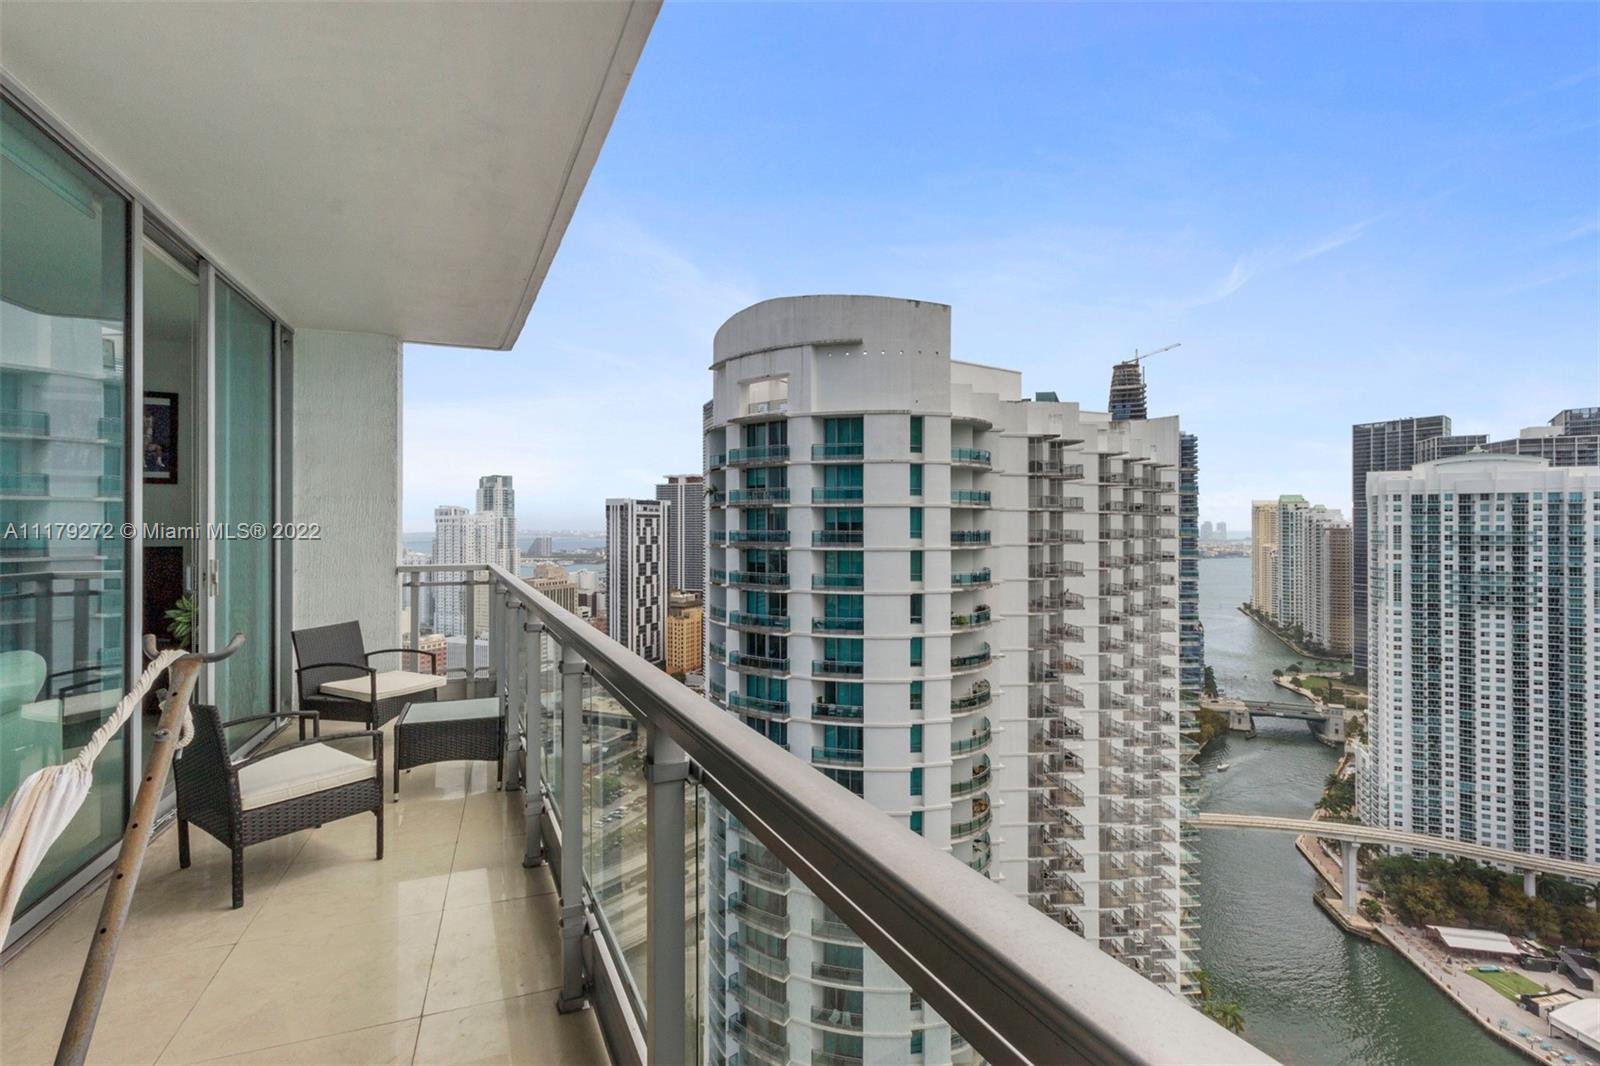 90 SW 3rd St 3903, Miami, Florida 33130, 2 Bedrooms Bedrooms, ,2 BathroomsBathrooms,Residentiallease,For Rent,90 SW 3rd St 3903,A11179272